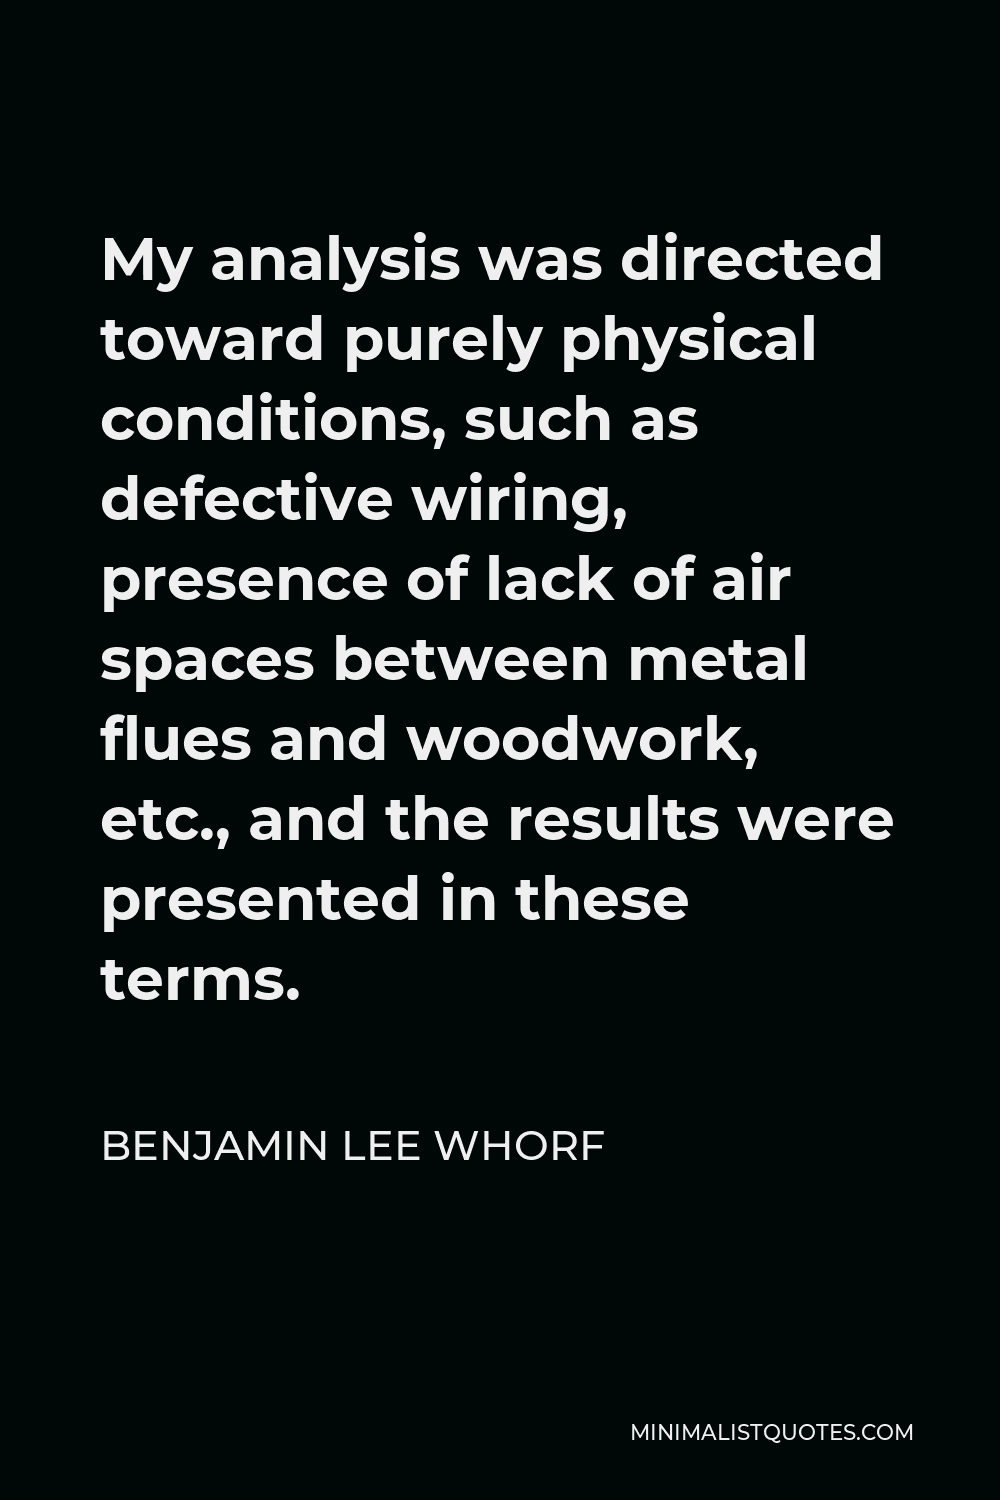 Benjamin Lee Whorf Quote - My analysis was directed toward purely physical conditions, such as defective wiring, presence of lack of air spaces between metal flues and woodwork, etc., and the results were presented in these terms.